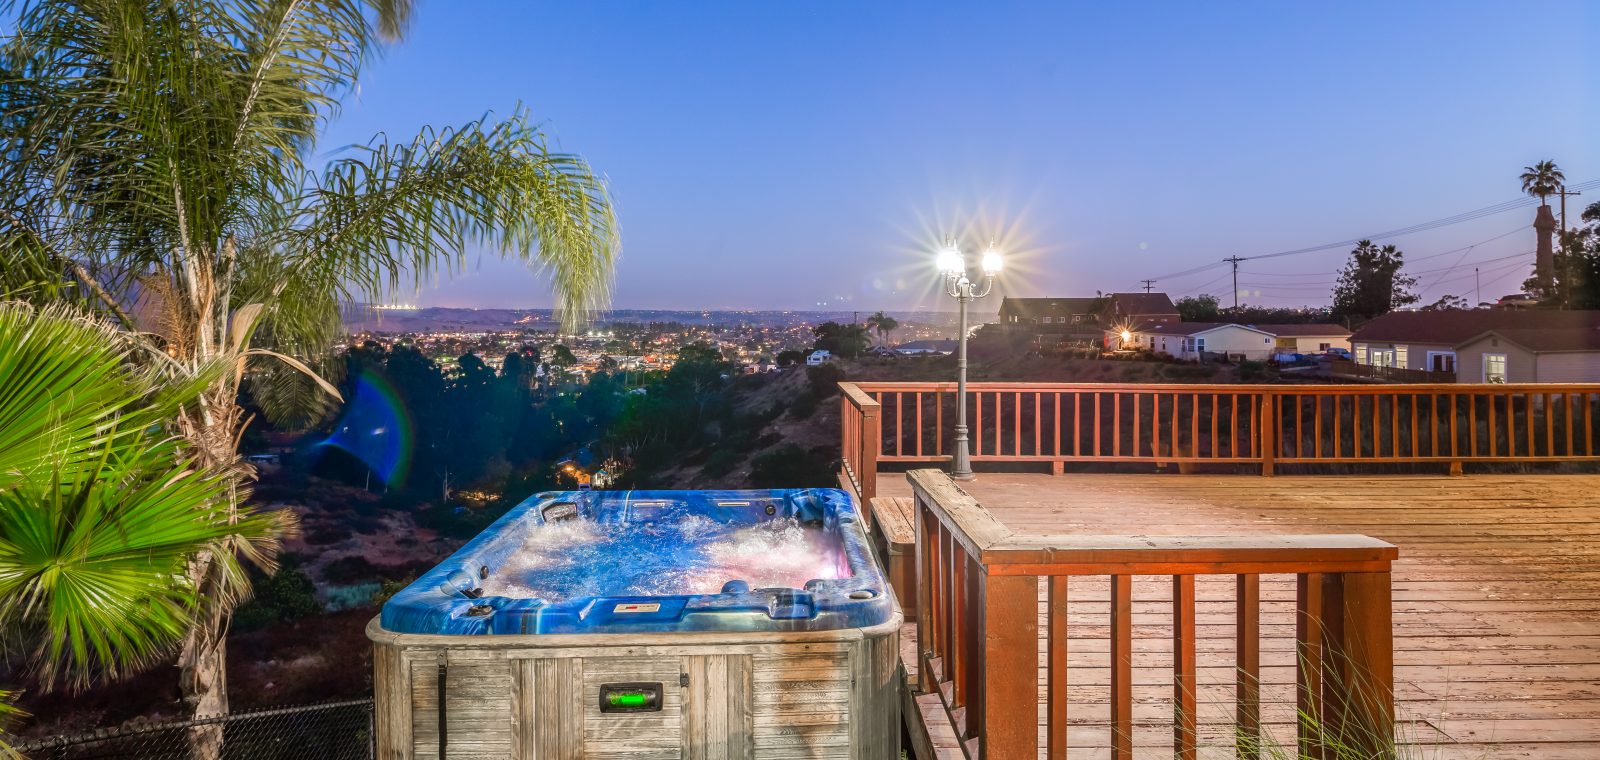 Spa - Blumenfeld Group | San Diego Homes for Sale